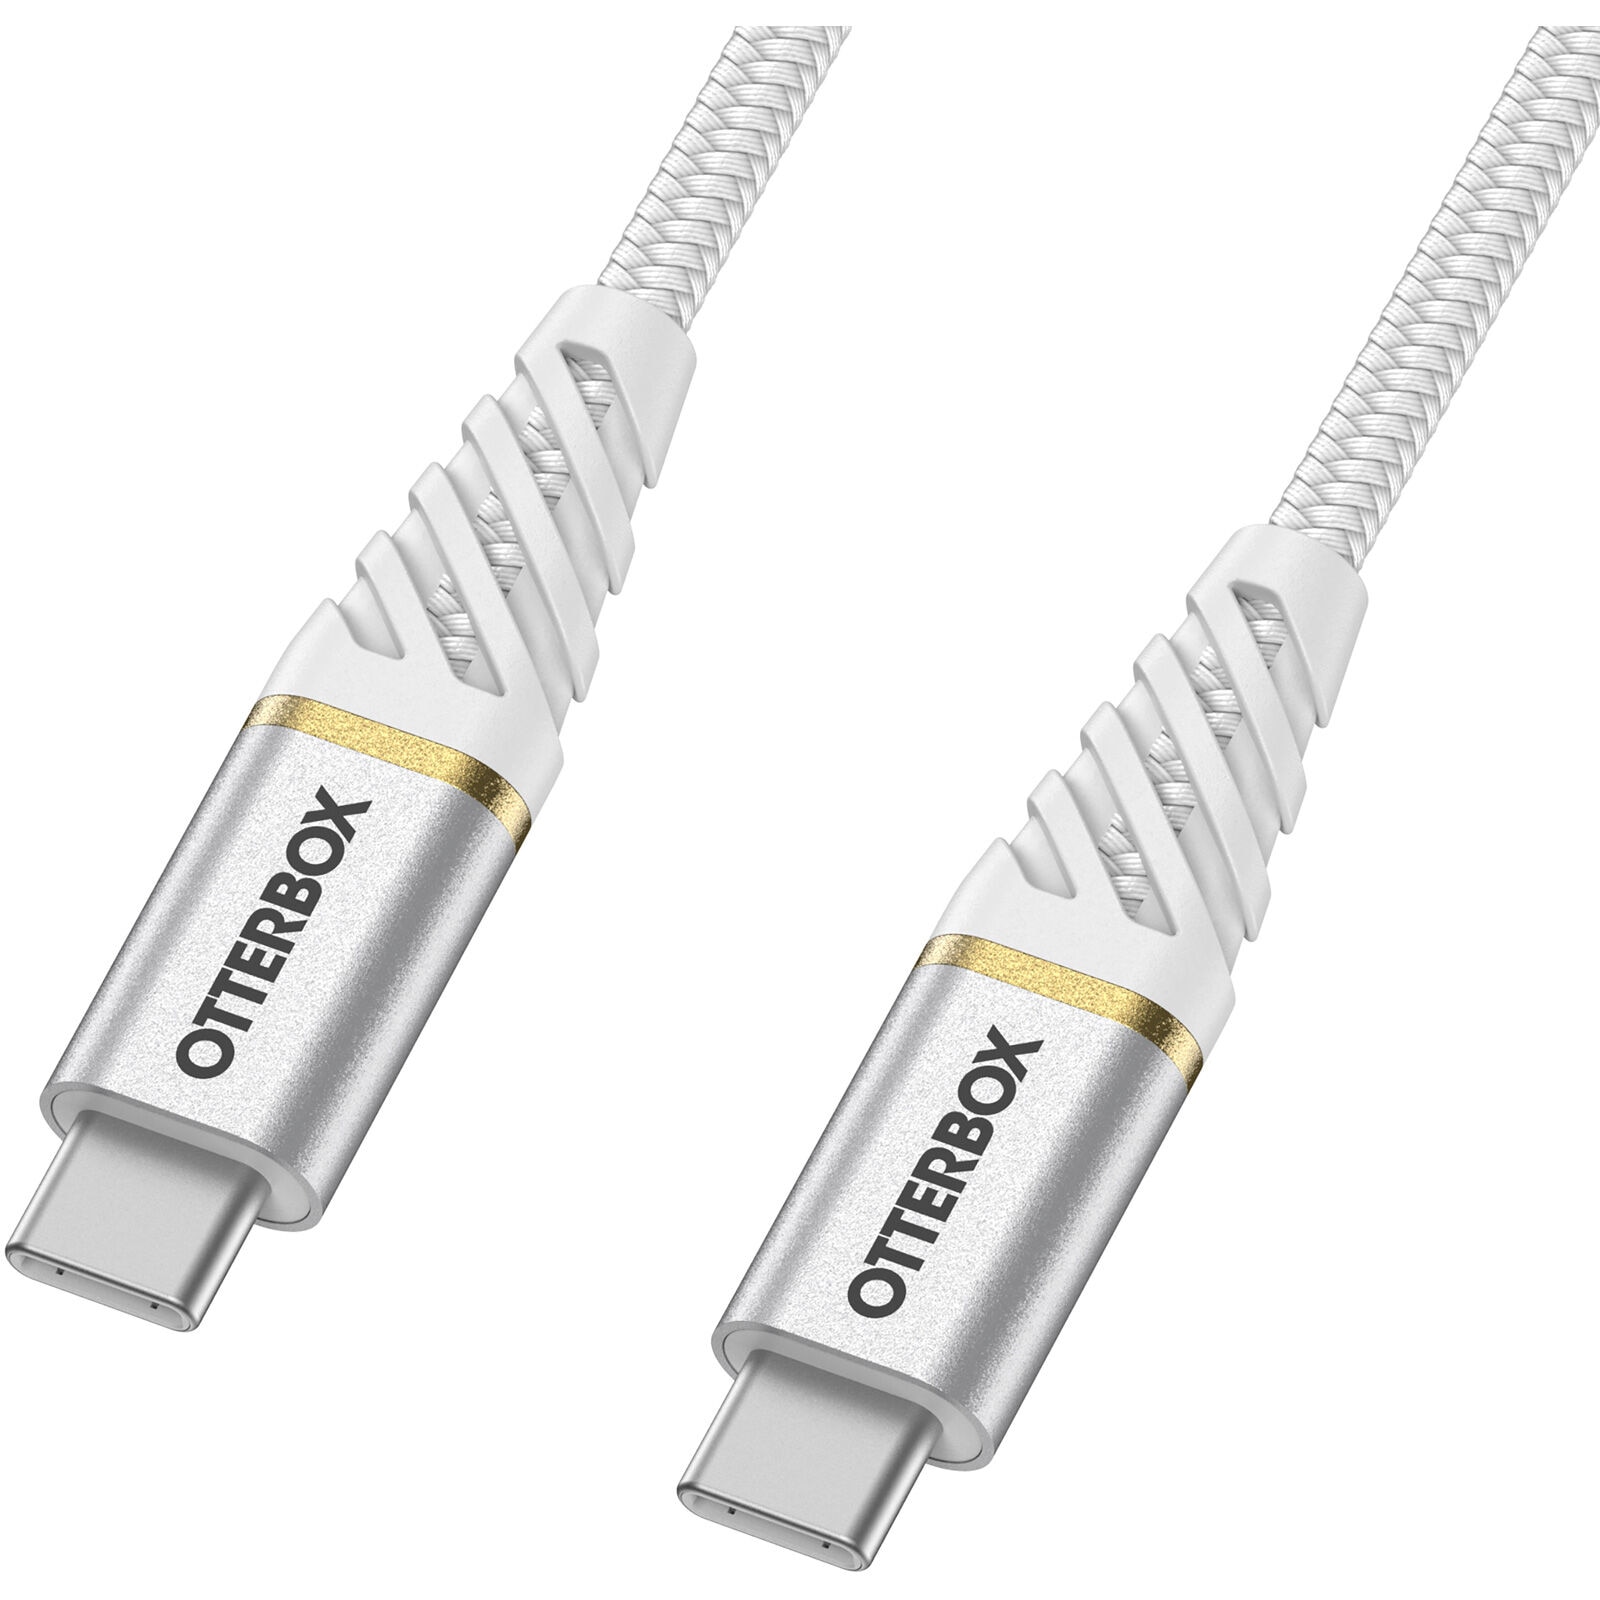 USB-C to USB-C Premium Fast Charge Cable 1m White